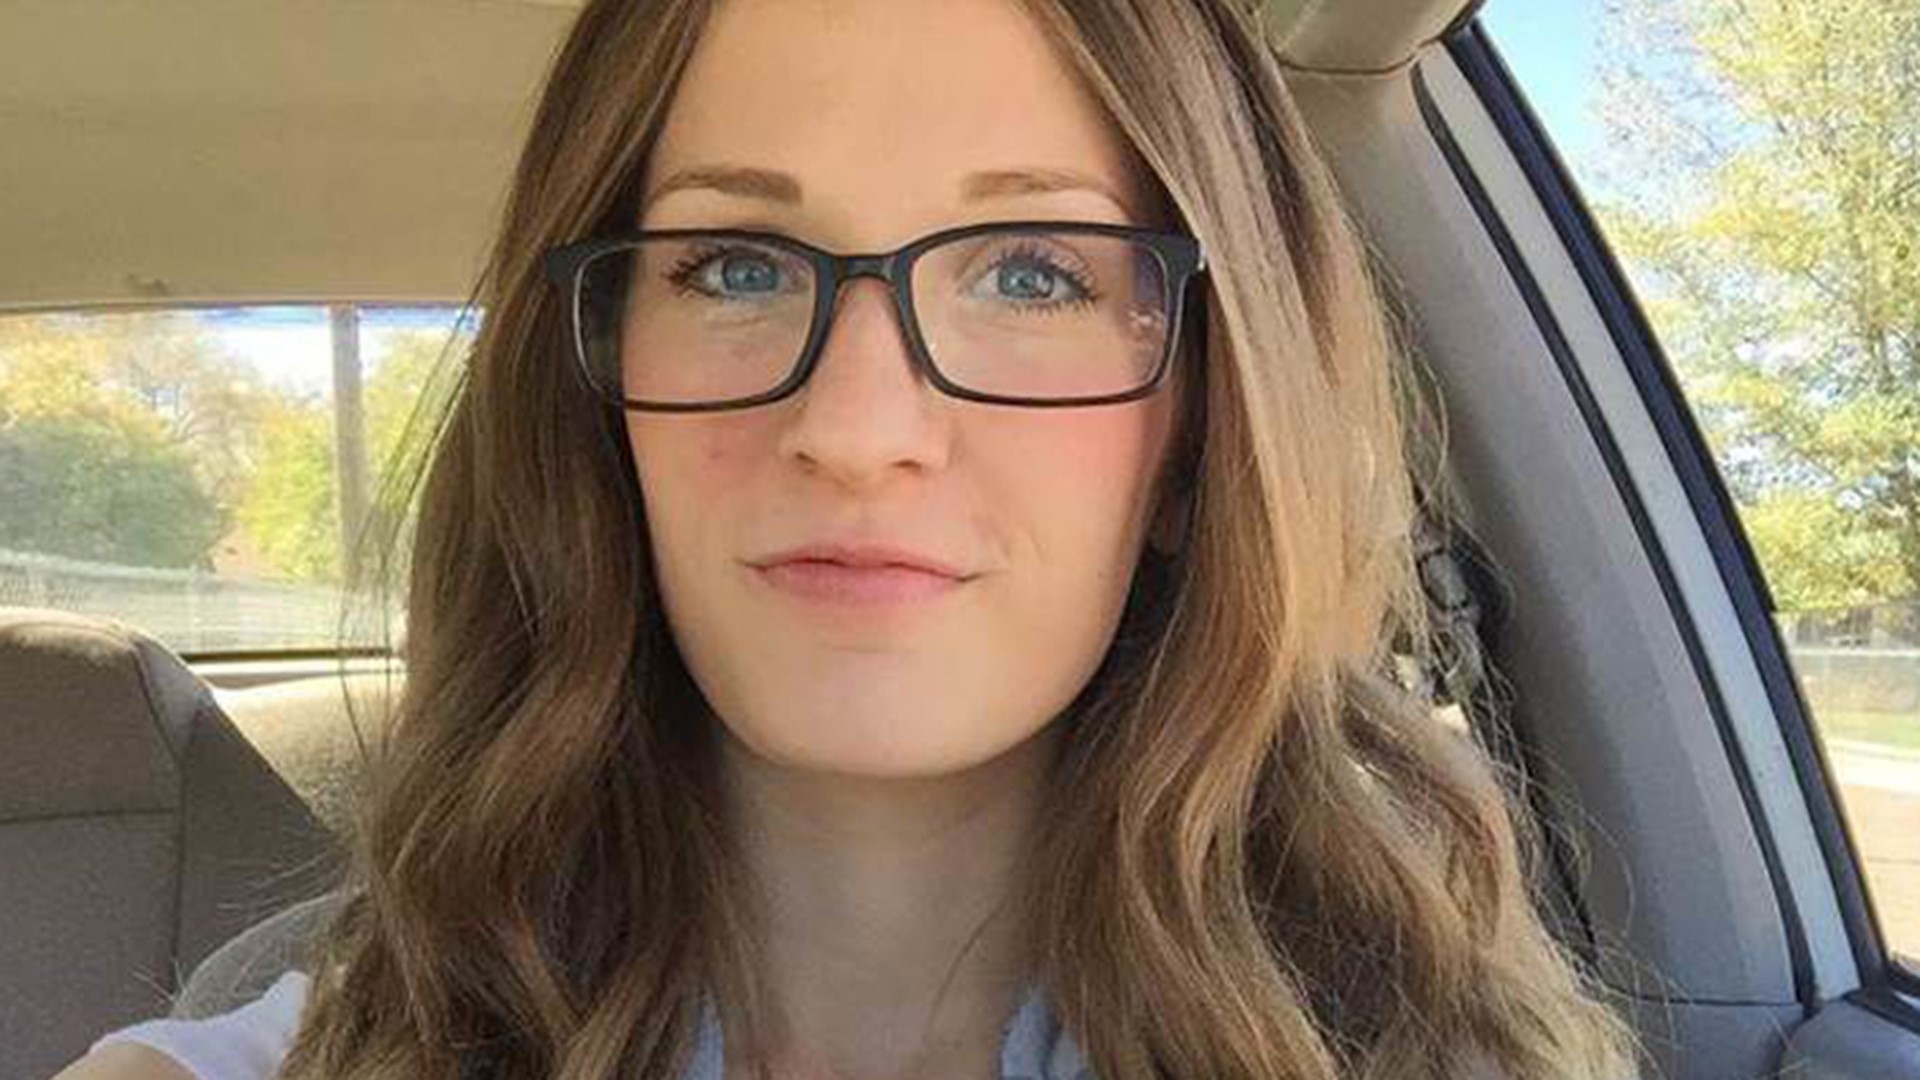 Police Believe Body Found In River Is Missing Idaho Woman 0635